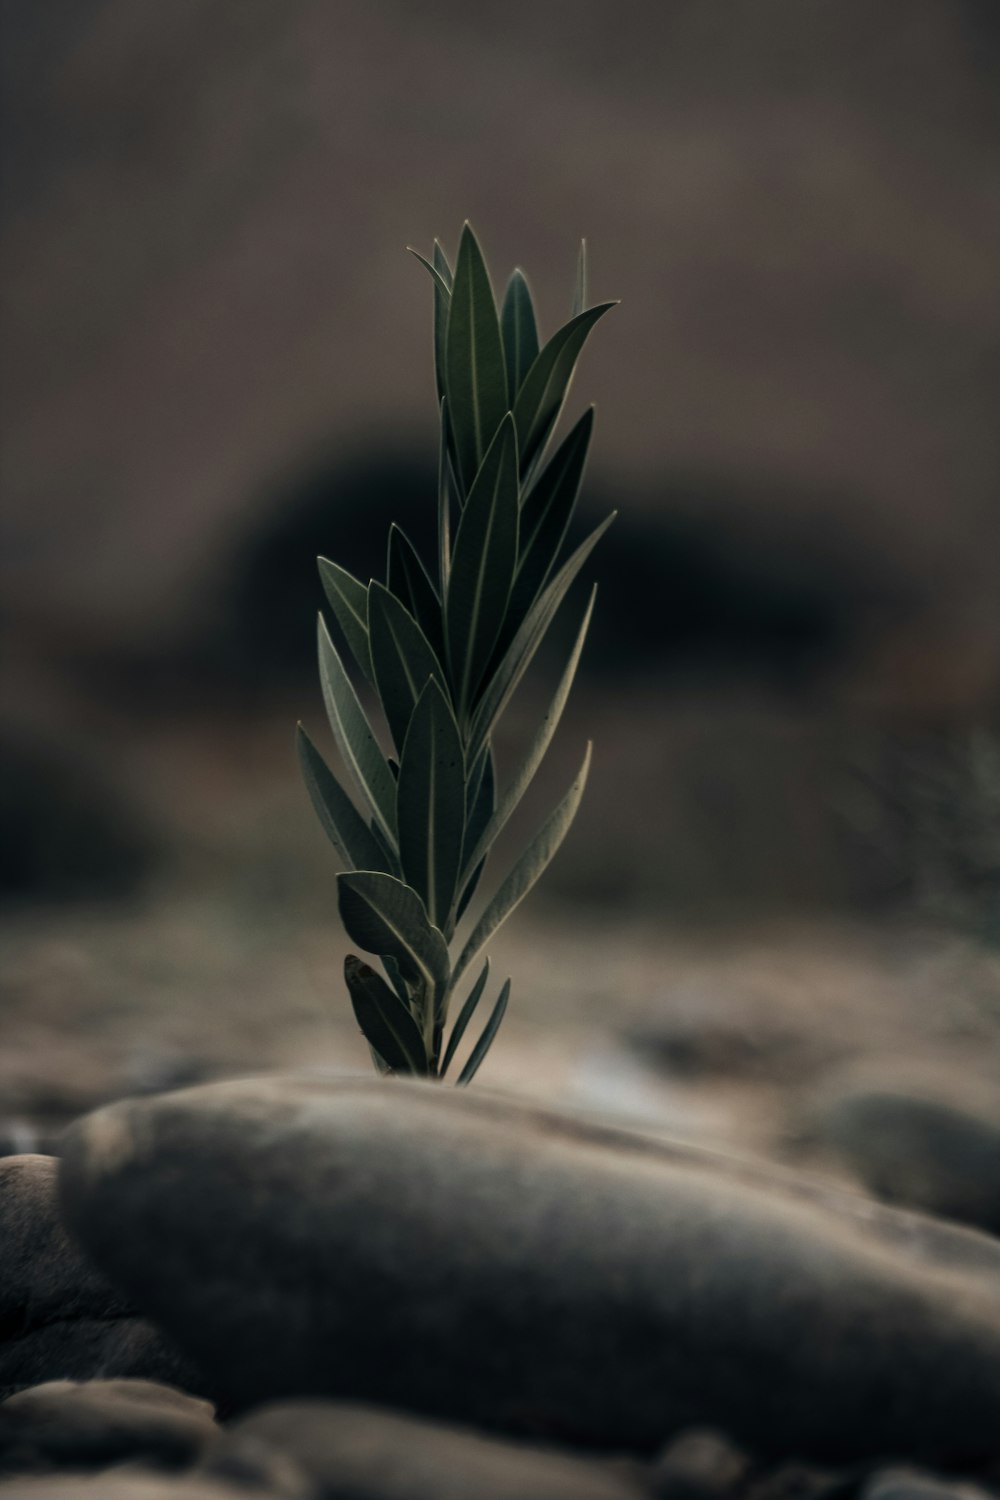 a single green plant is growing out of some rocks